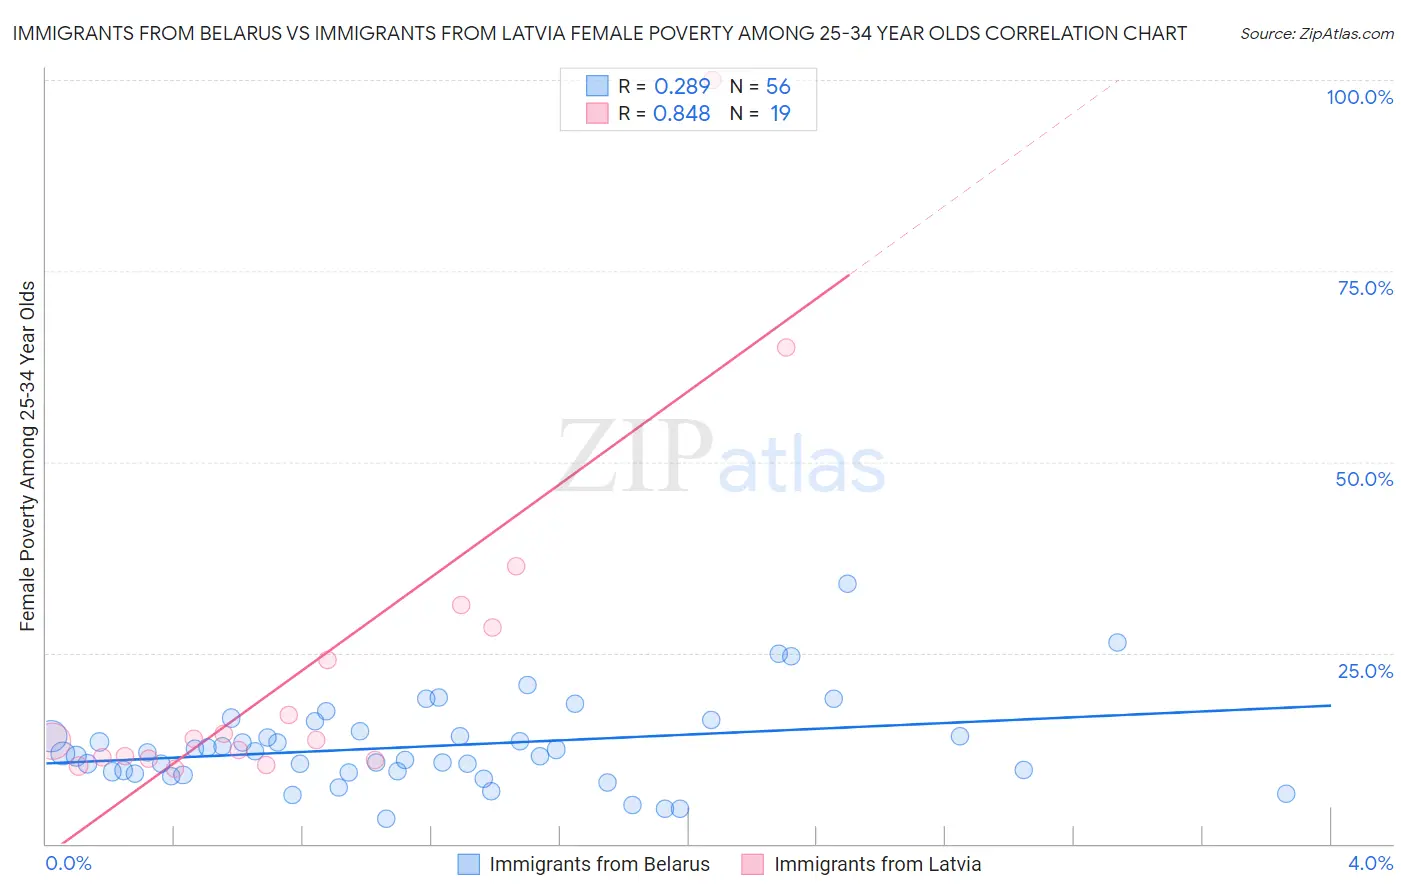 Immigrants from Belarus vs Immigrants from Latvia Female Poverty Among 25-34 Year Olds